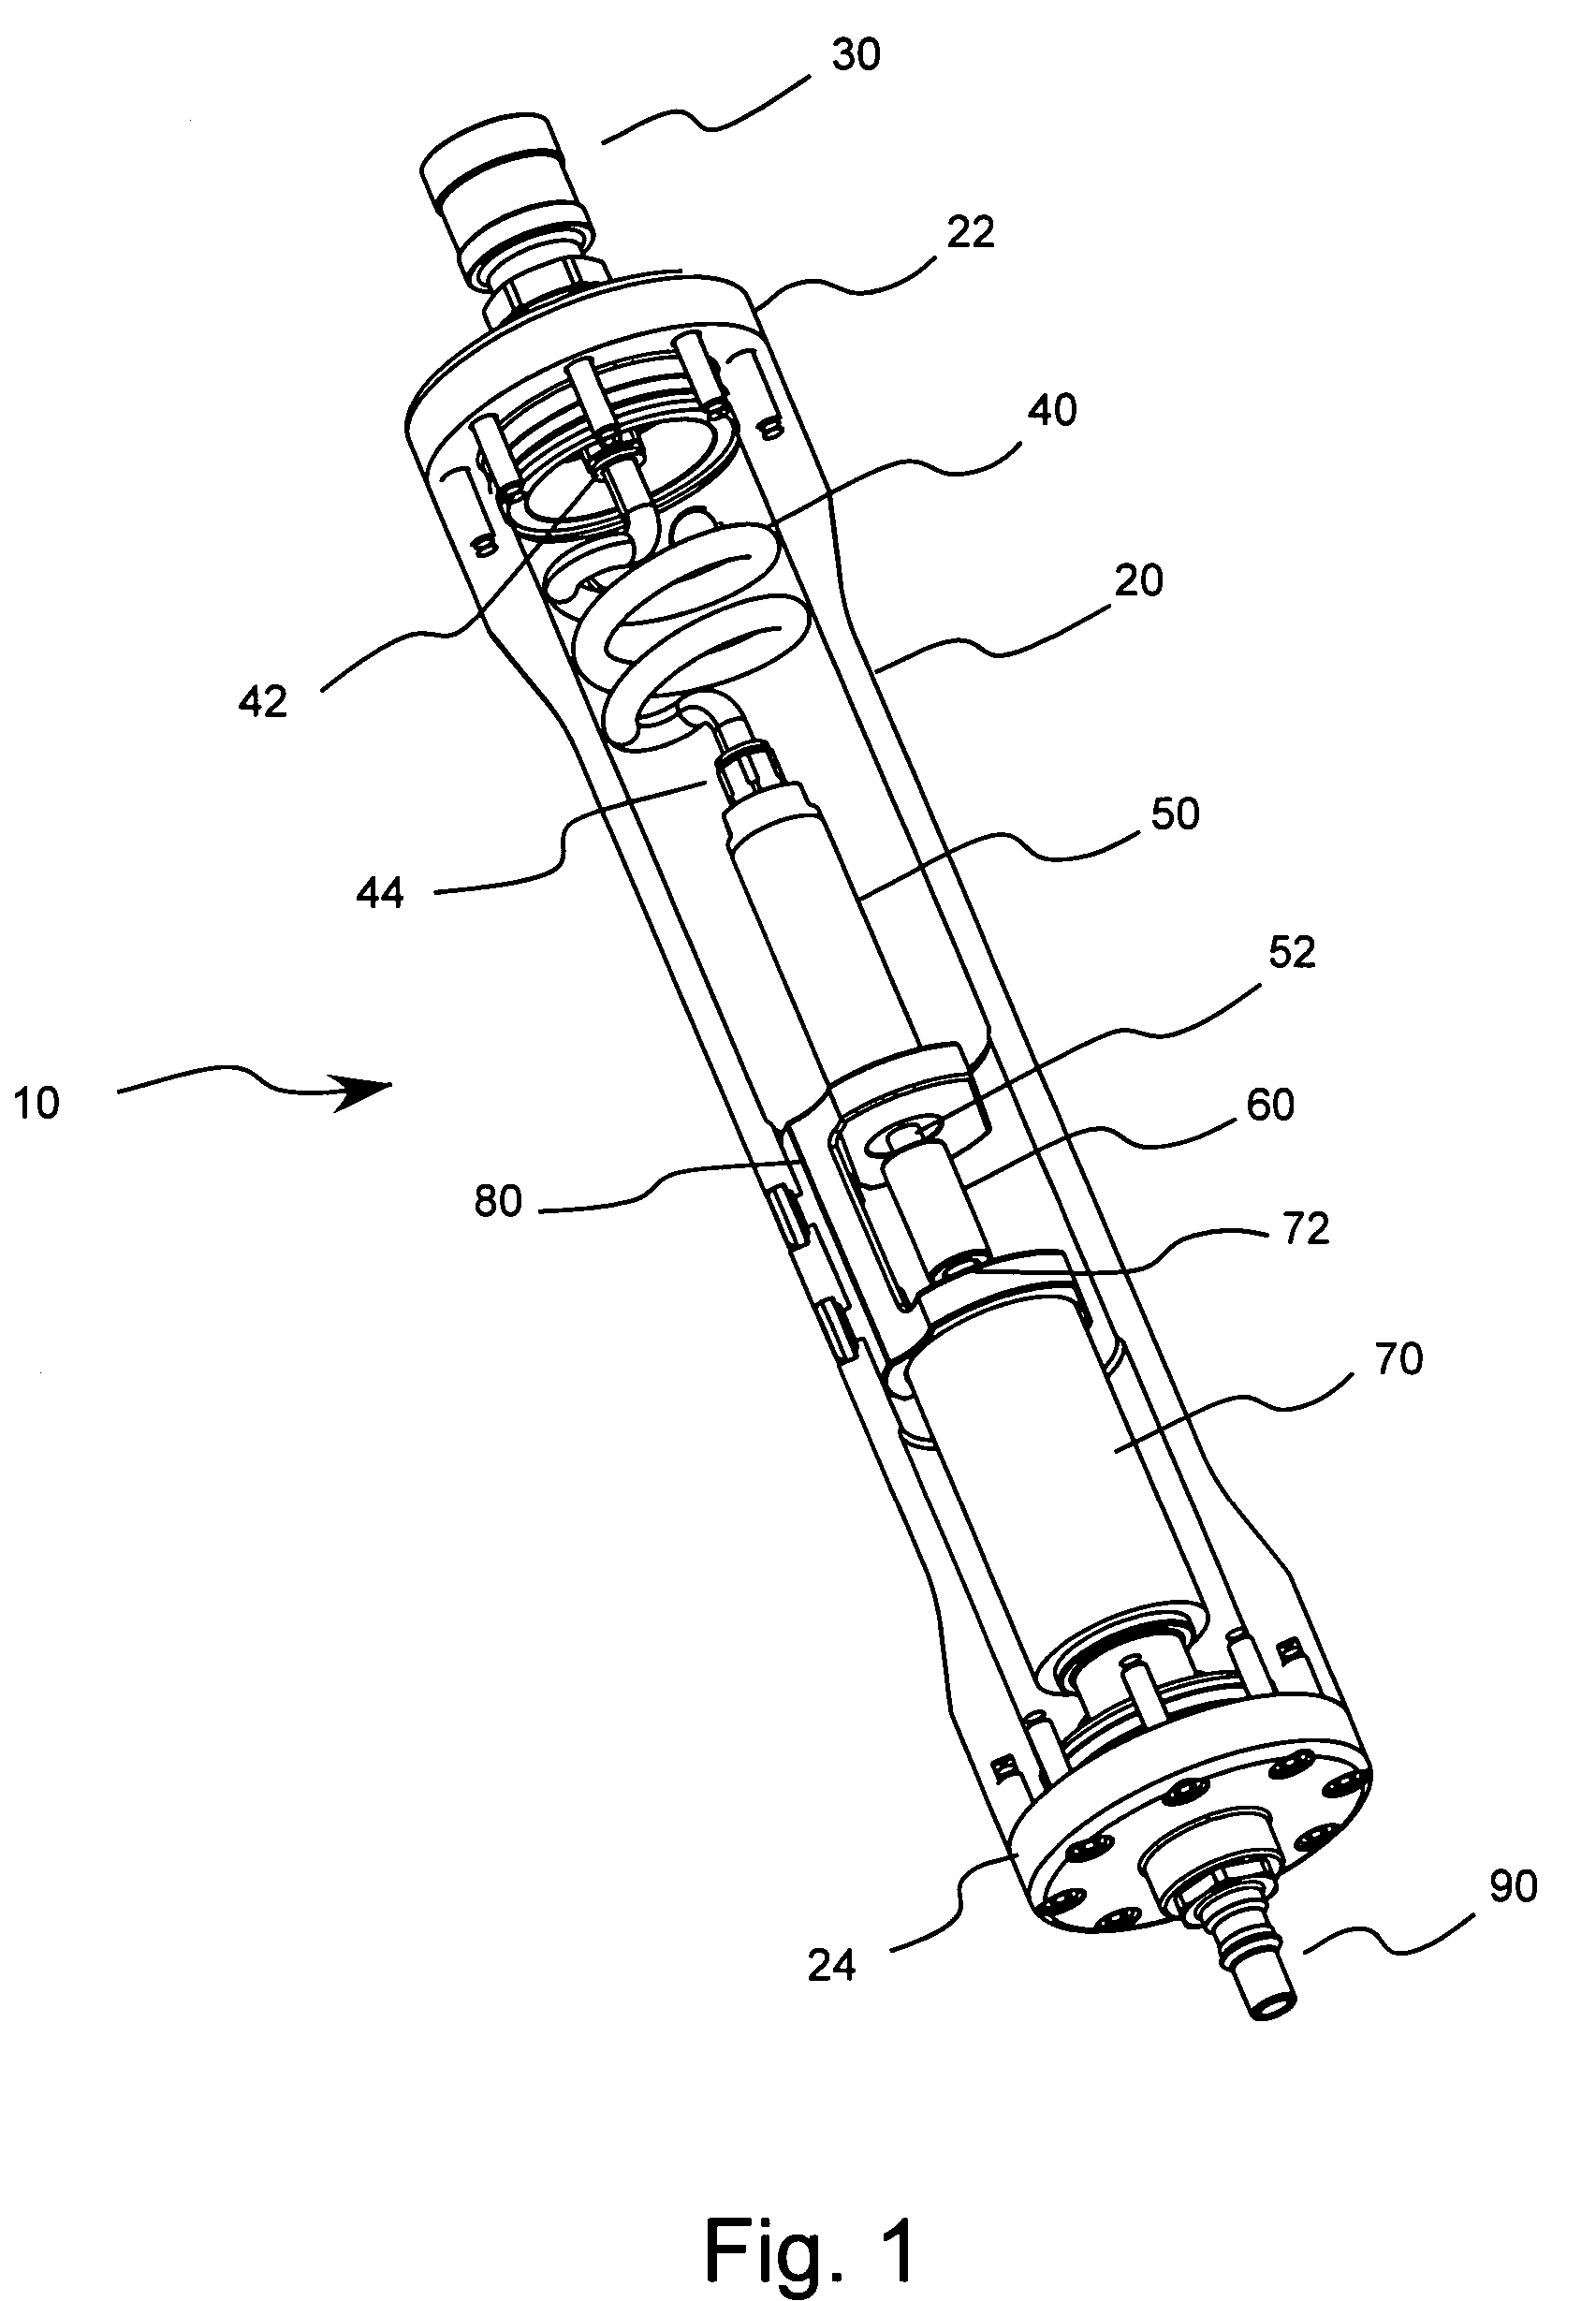 Devices, systems and methods for generating electricity from gases stored in containers under pressure